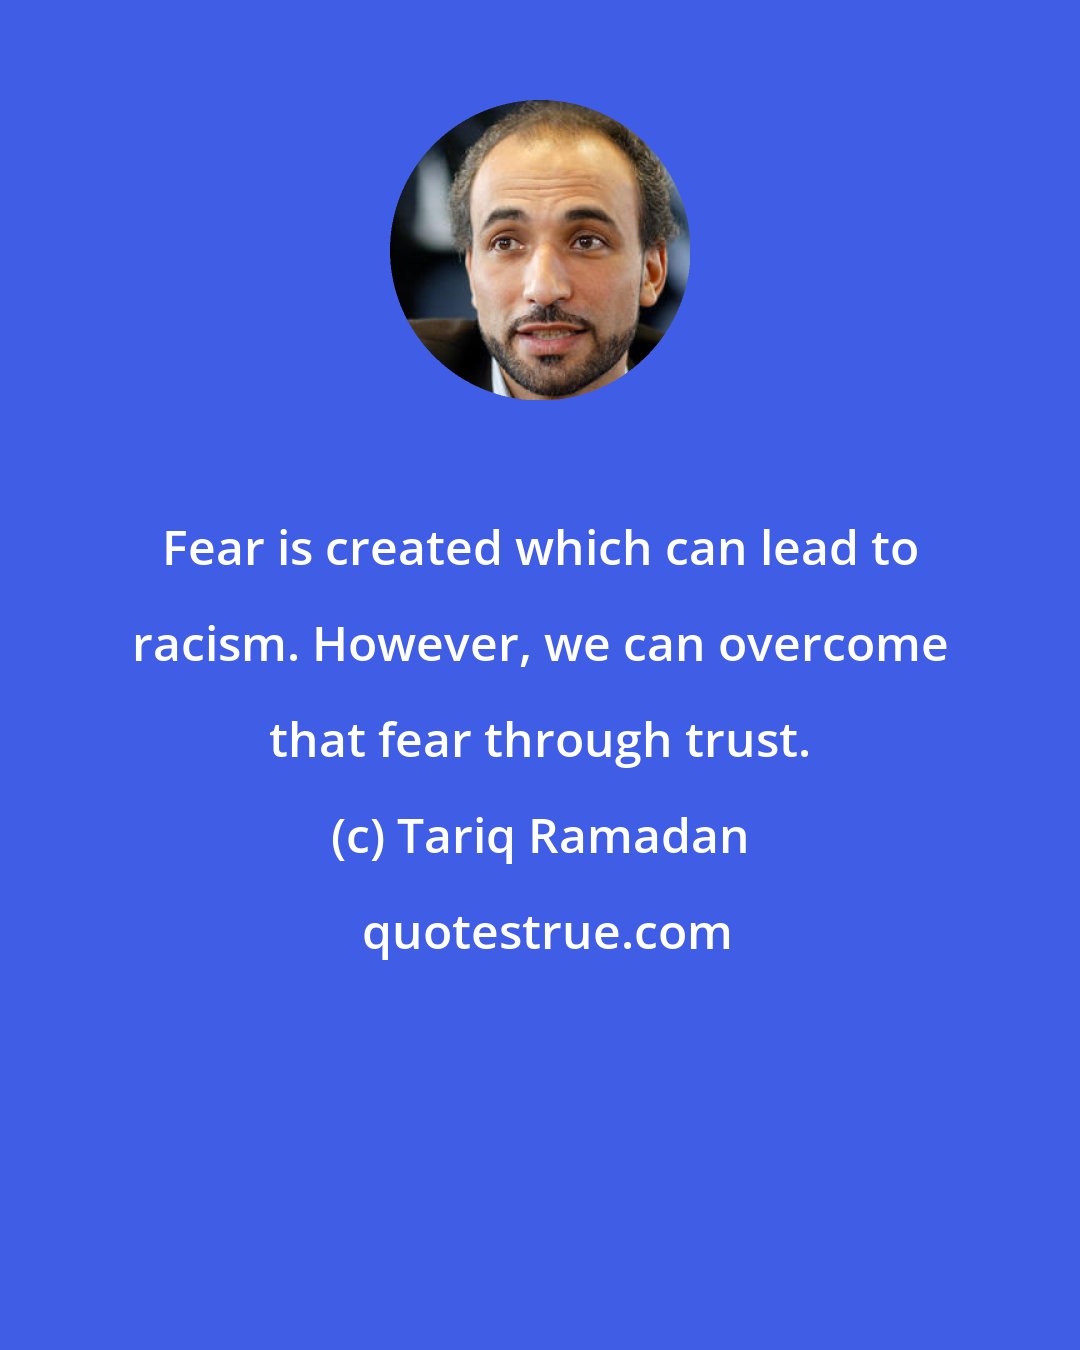 Tariq Ramadan: Fear is created which can lead to racism. However, we can overcome that fear through trust.